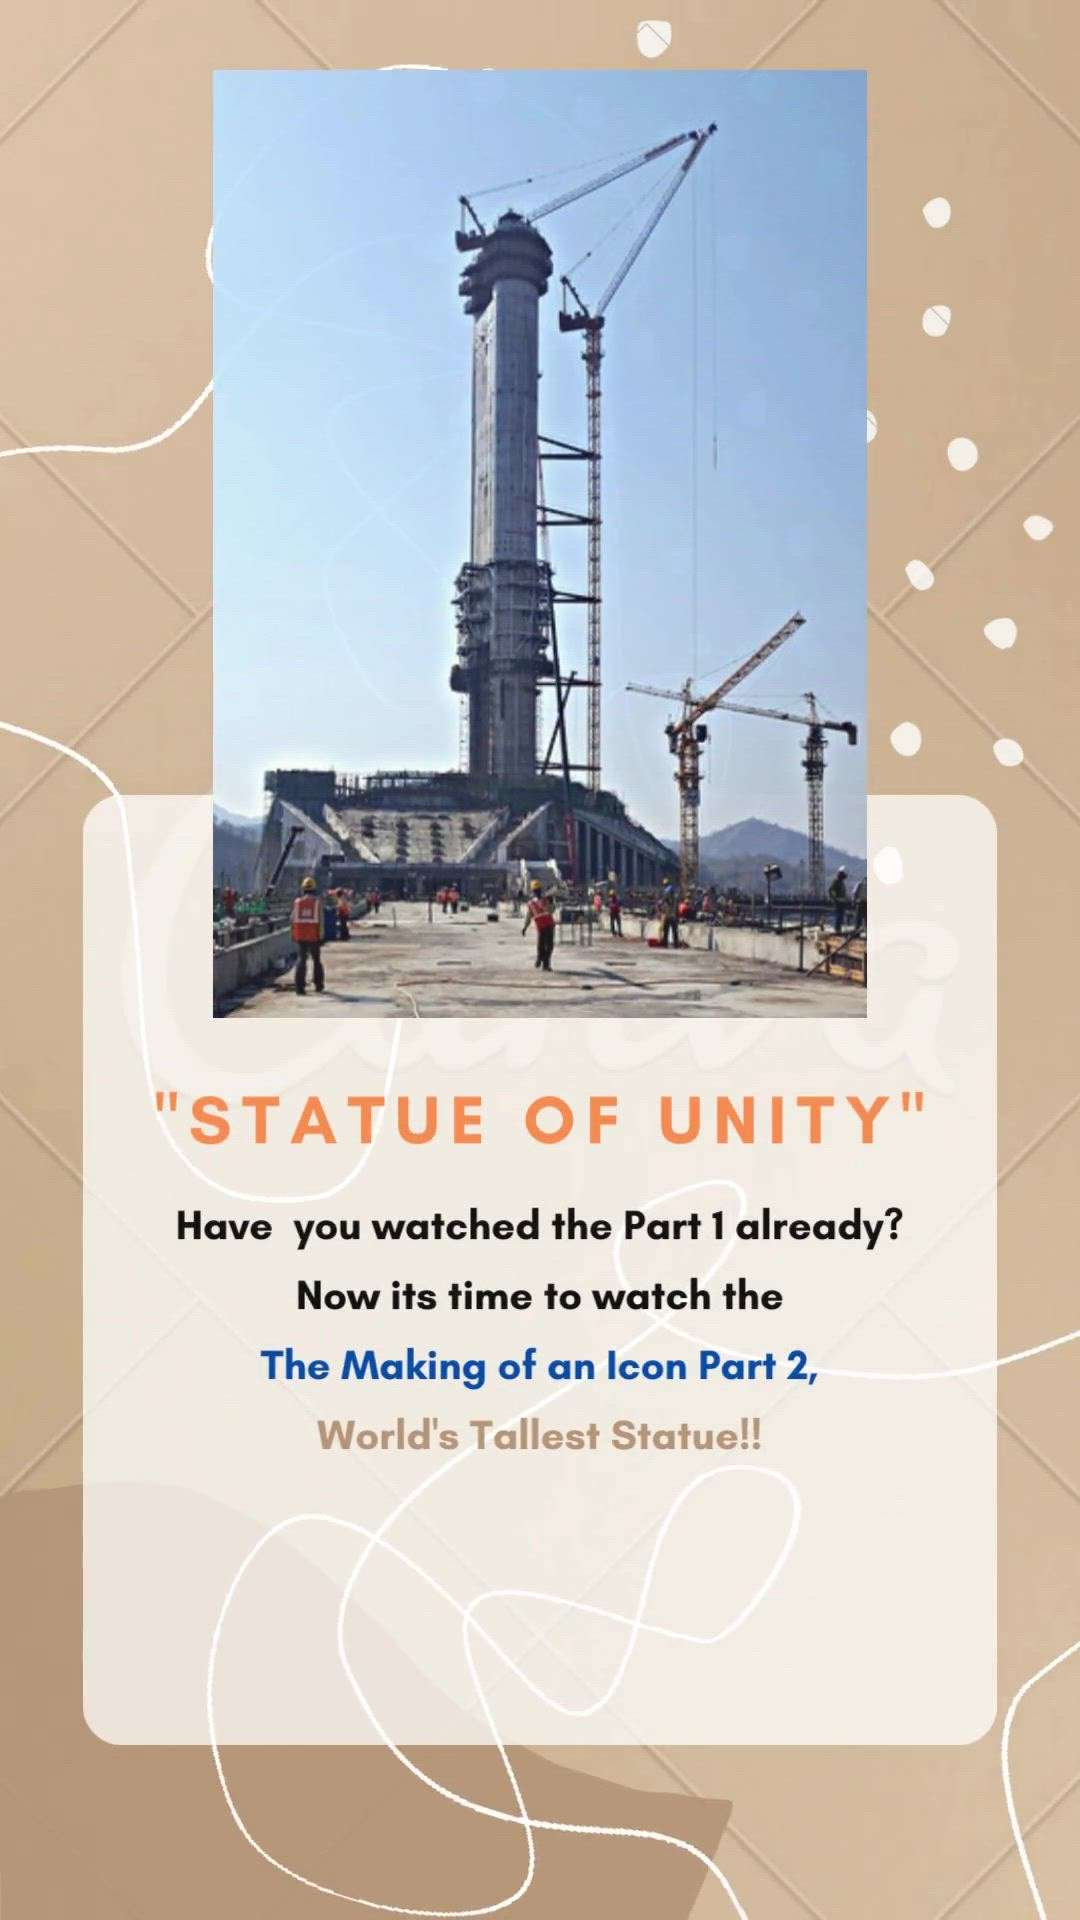 Here we go! Part 2 is now live. Check out the full video on our YouTube channel. Link: https://youtu.be/S9FJ5v4p26U


Follow us for more such amazing updates 
.
.
#statueofunity #statueofunity🇮🇳 #statueofunitytourism #statueofunitytentcity #statueofequality #unity #runforunity #unitymarch #nationalunityday #unityday #unity3d #unitymarch2022 #nationalunityday2020 #nationalunityday2022 #sardarvallabhbhaipatel #kevadia #ironman #ironmanofindia #architect #architecture #2022 #avminfratech #engineeringmarvel #part2 #youtube